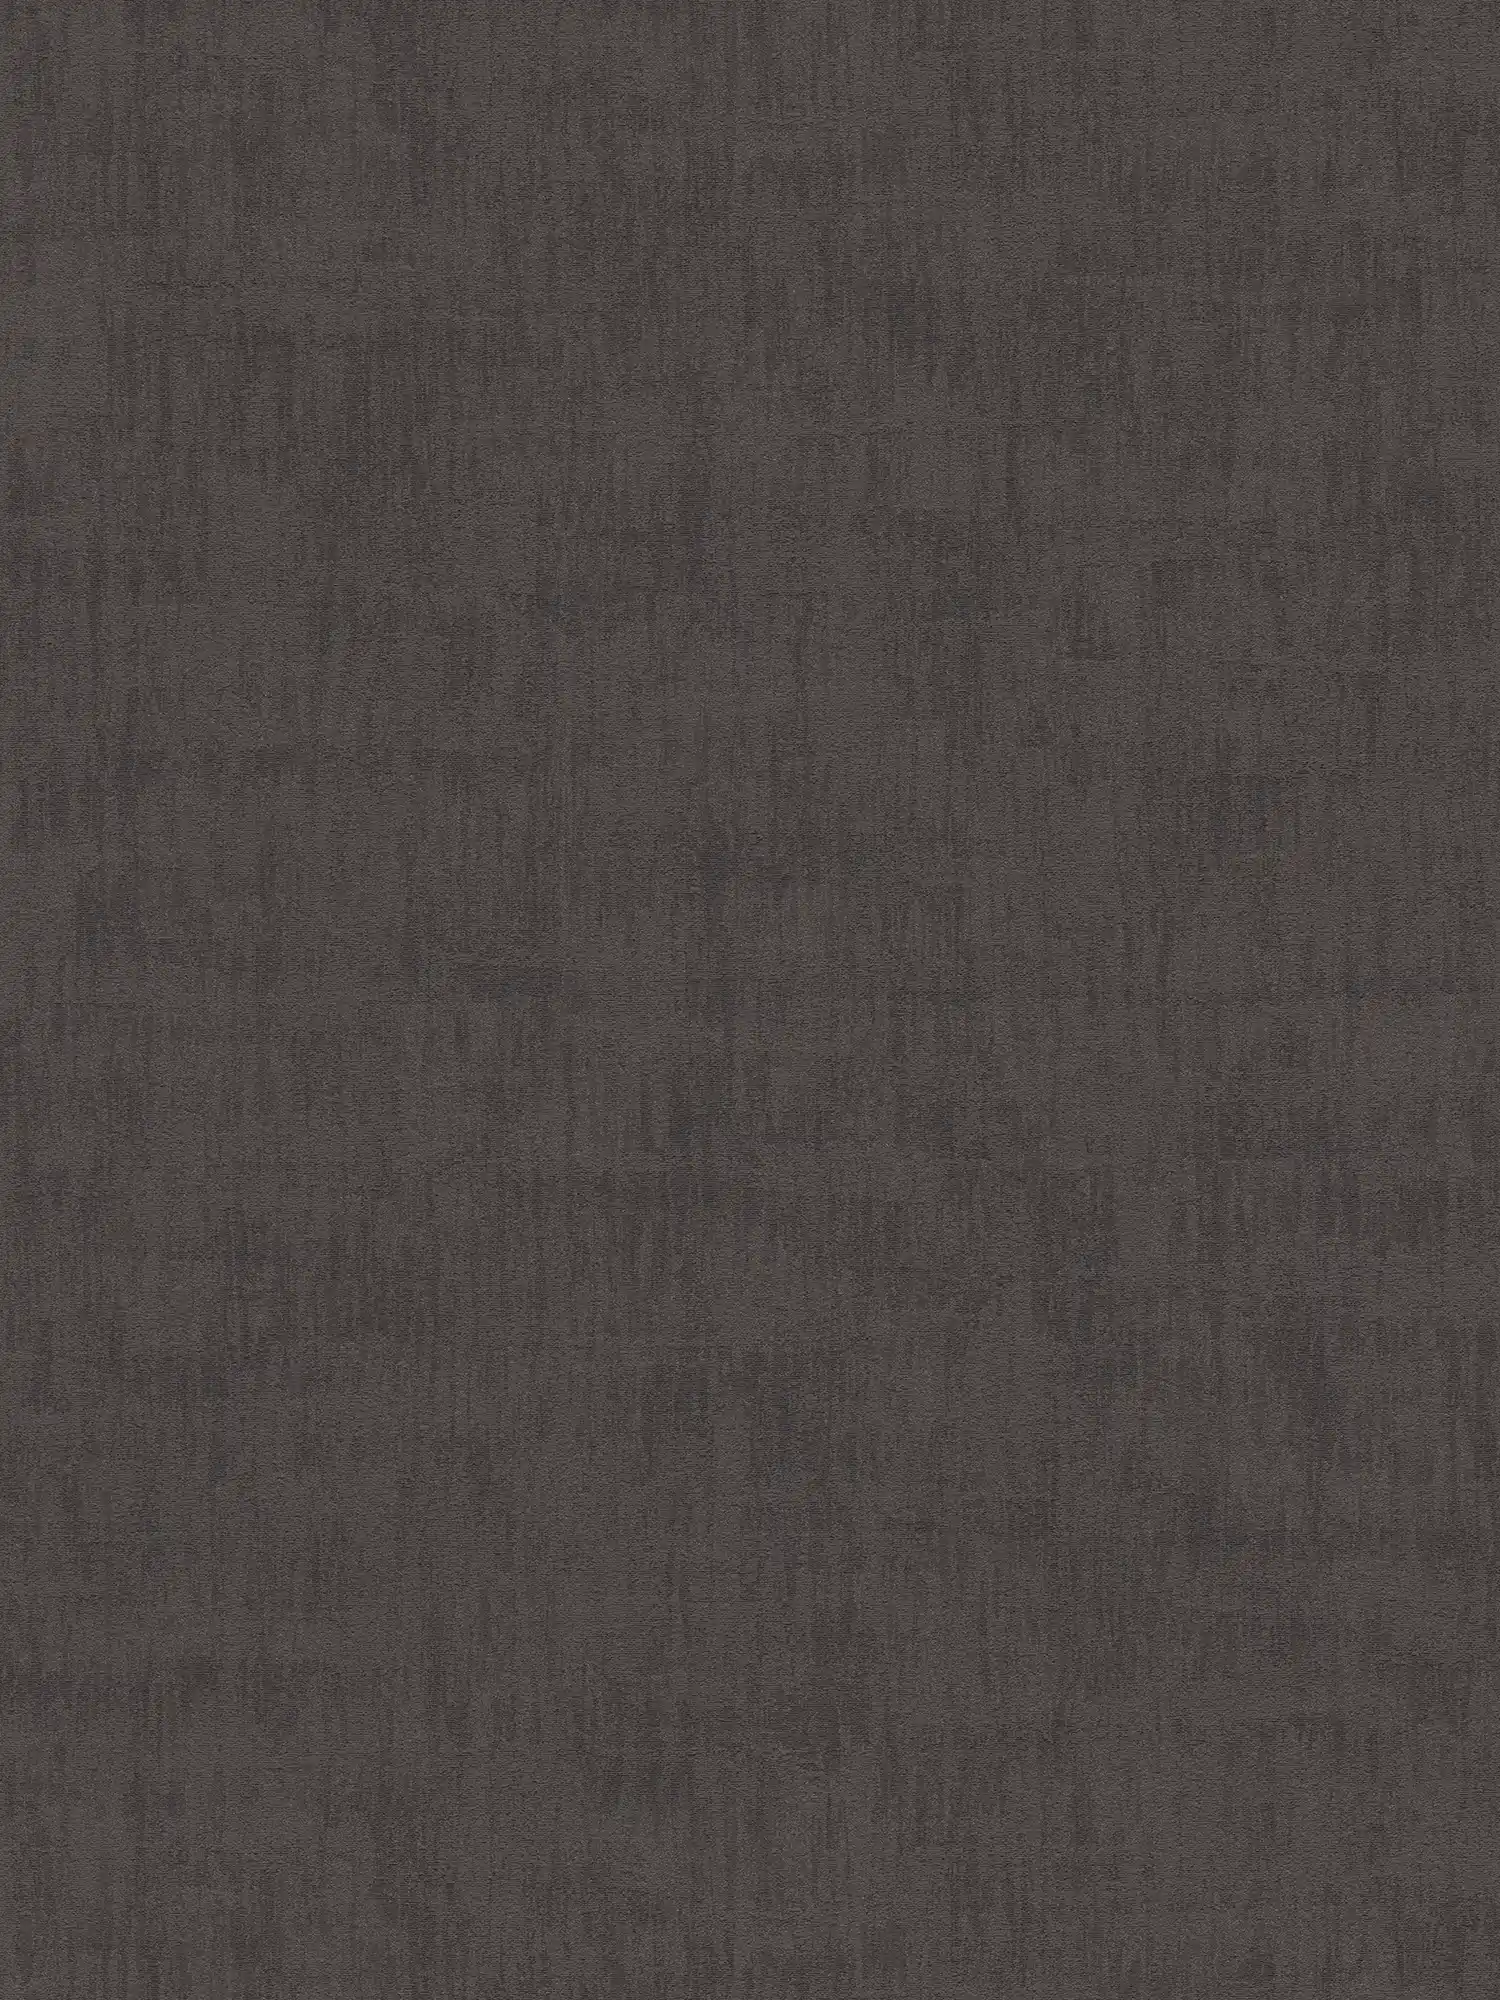 Used look wallpaper with abstract raffia pattern - black
